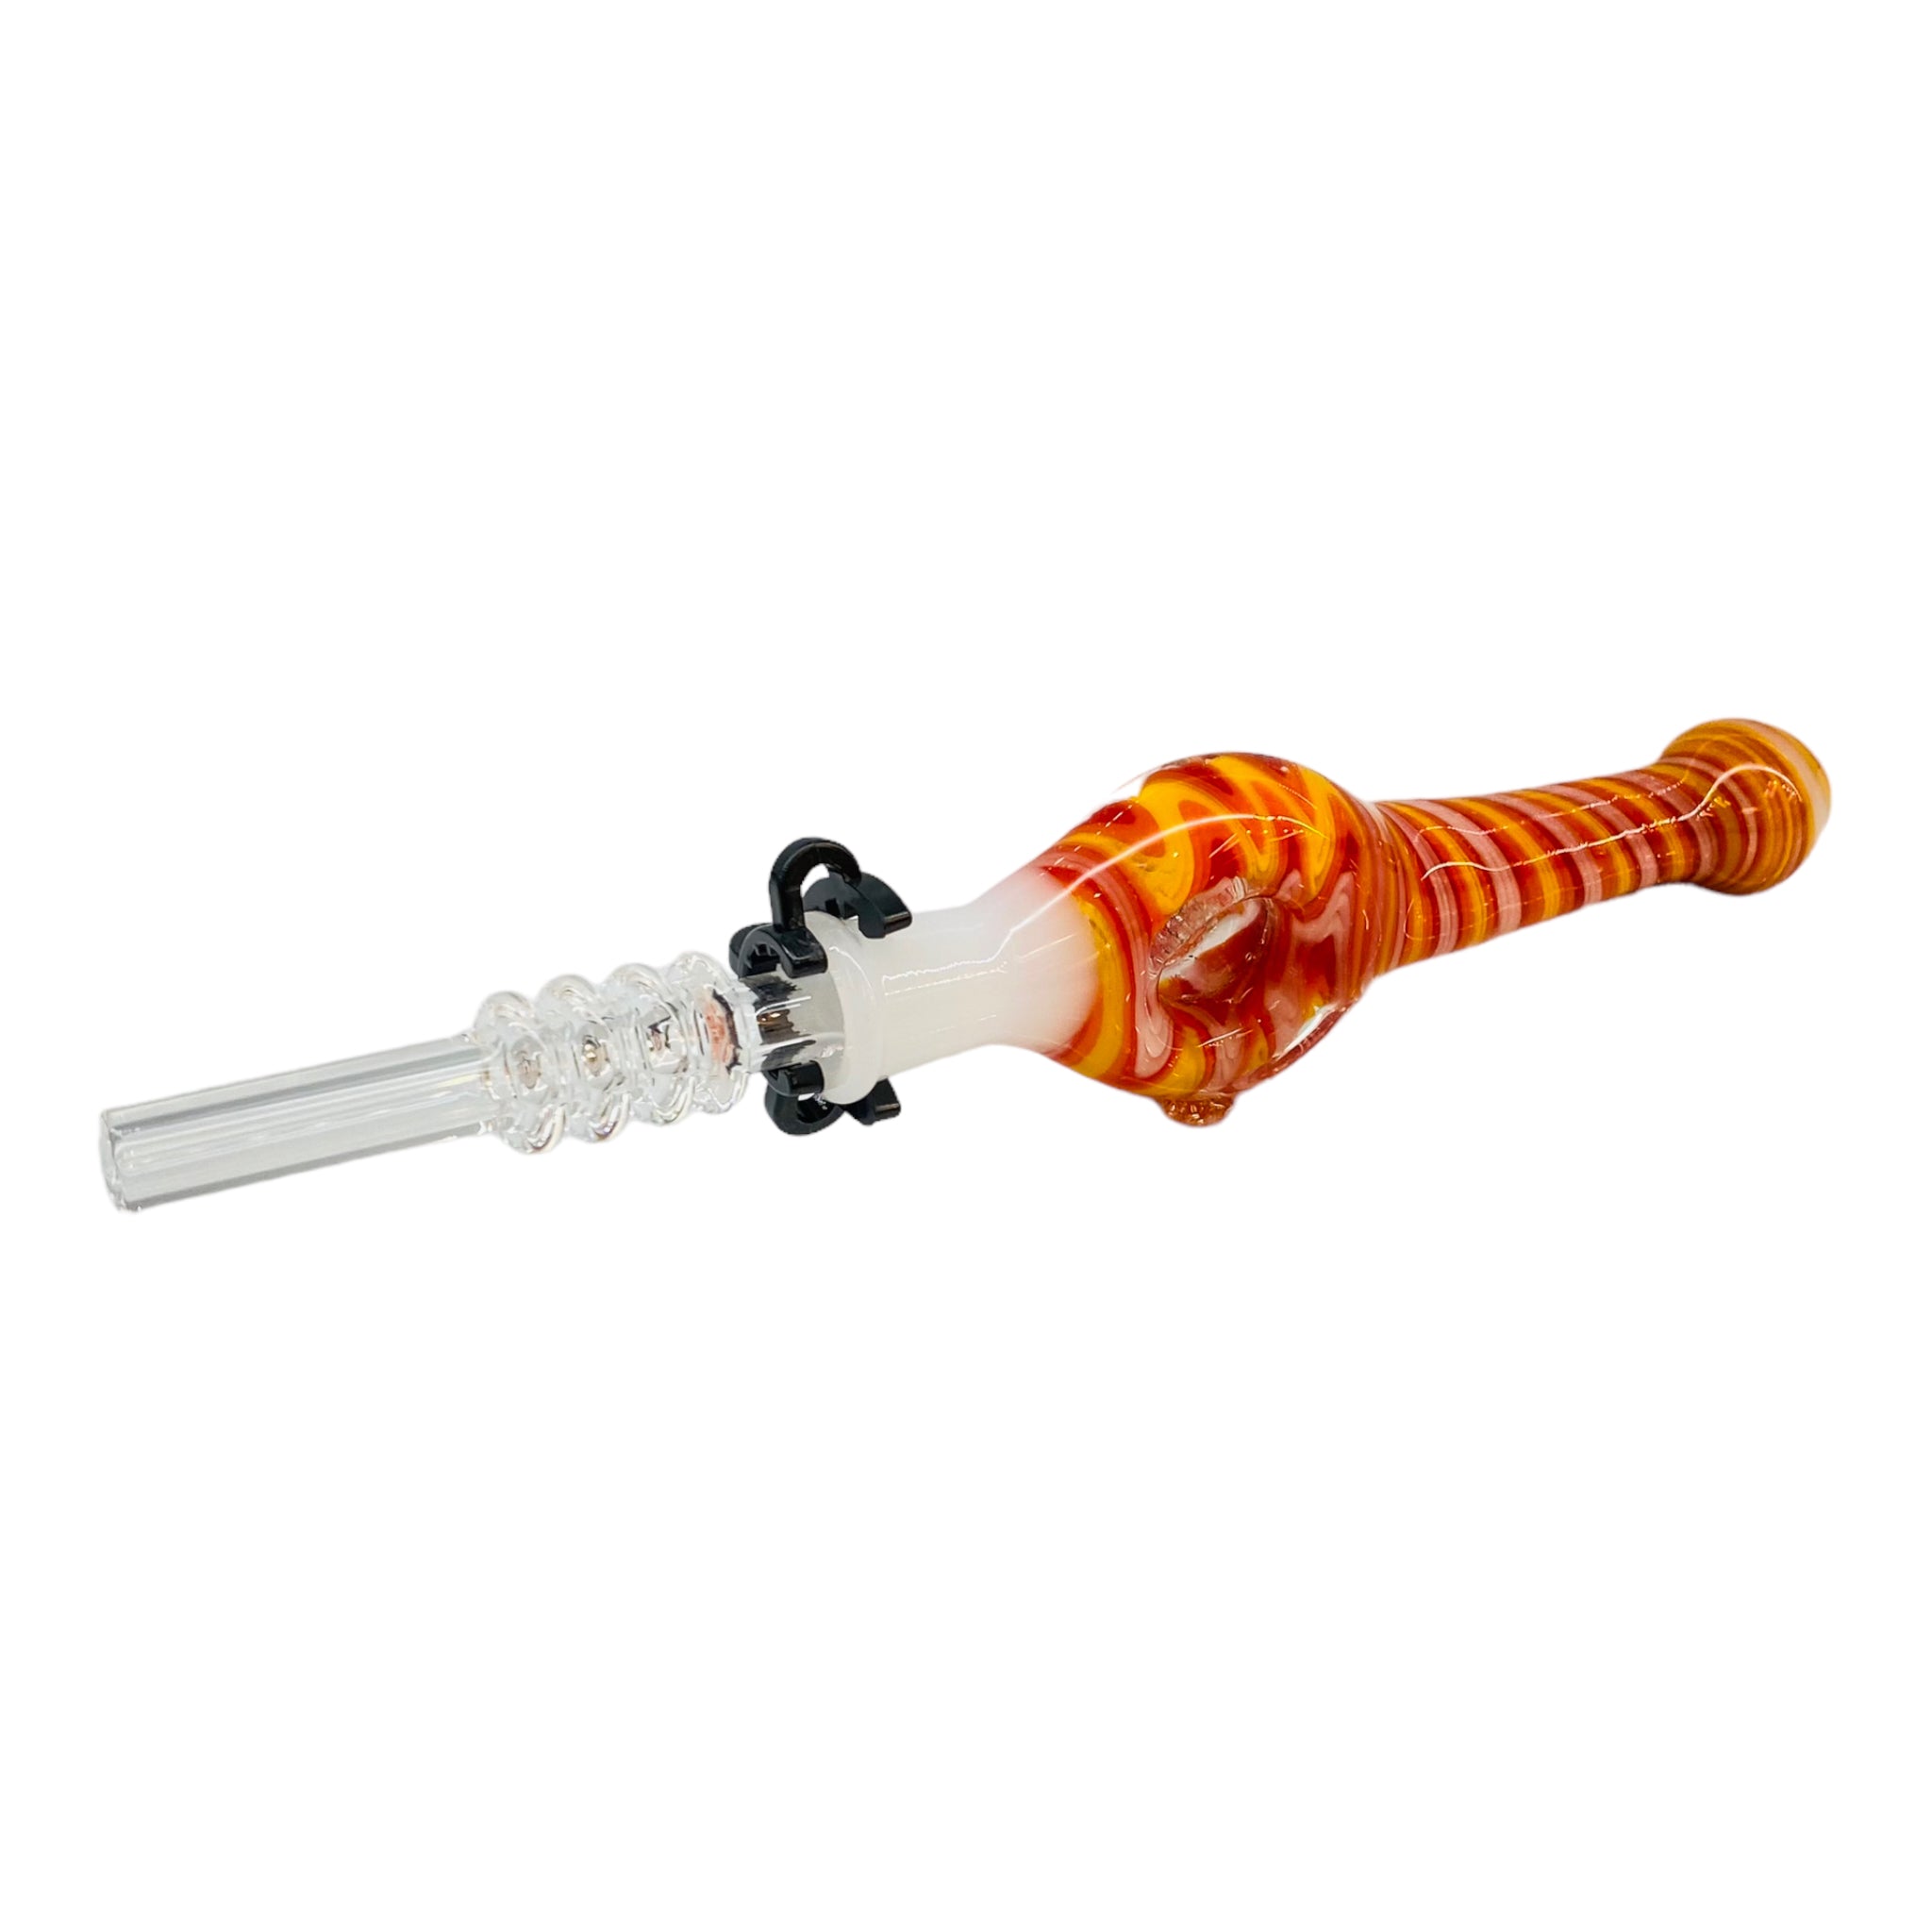 10mm Nectar Collector - Red, Orange And Yellow Wig Wag Spiral Donut With Quartz Tip